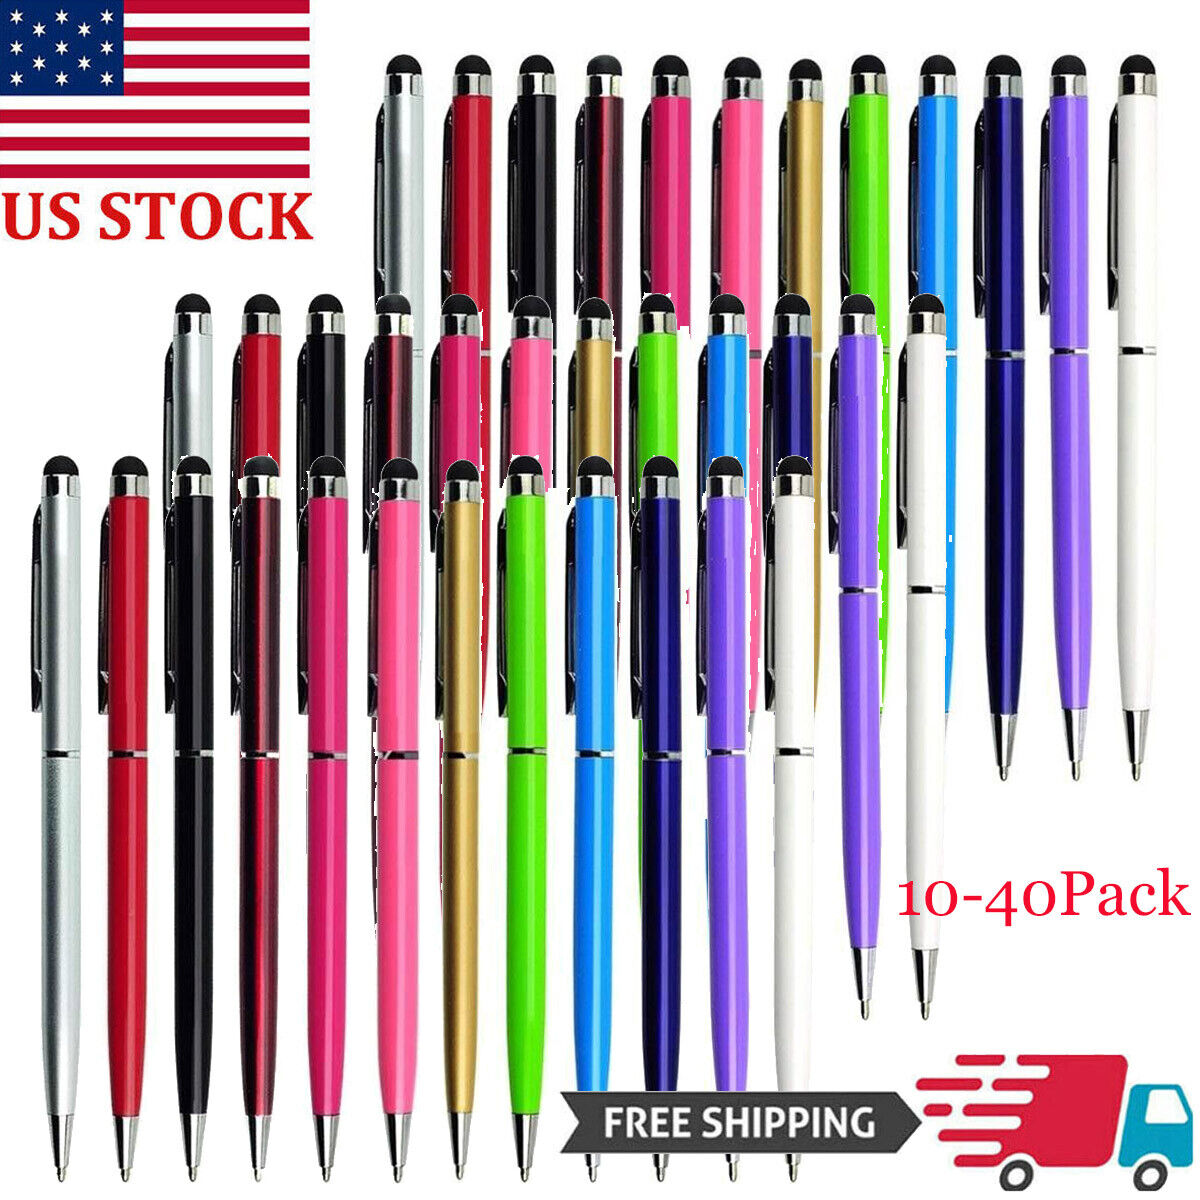 Stylus Pens for Touch Screen Capacitive Tablet Phone for iPad Android Universal